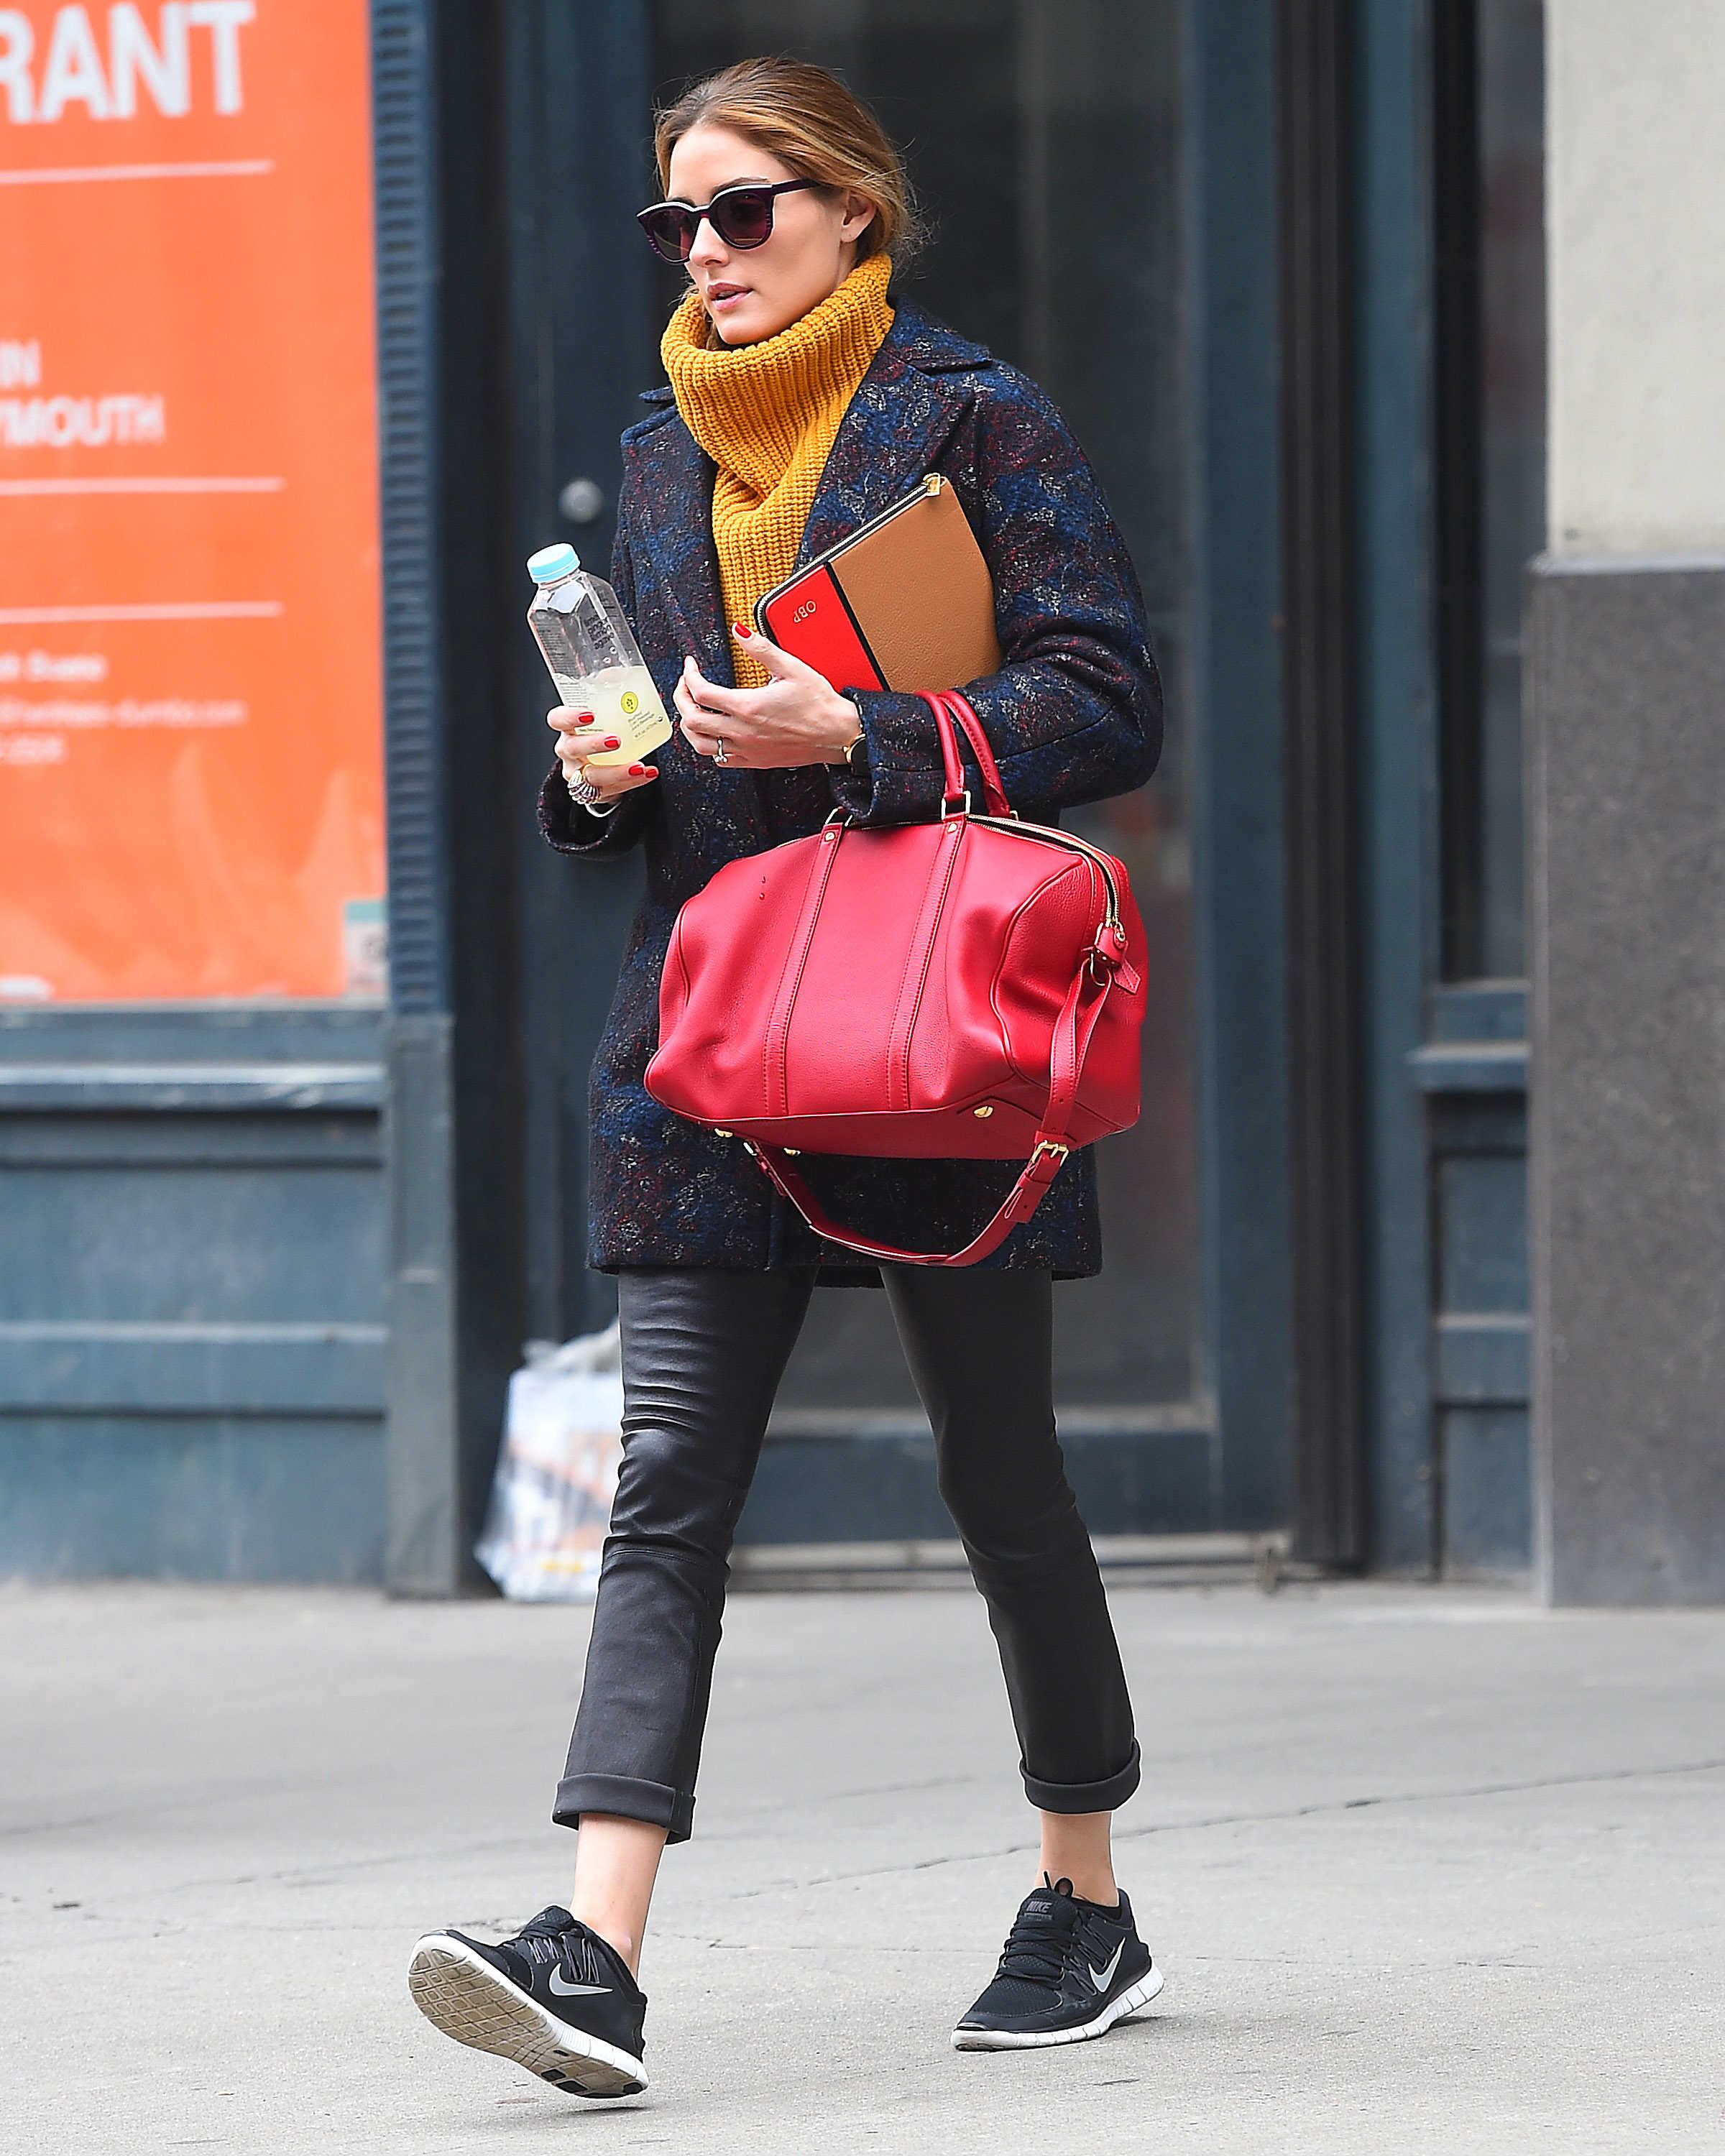 Olivia Palermo out and about in NYC